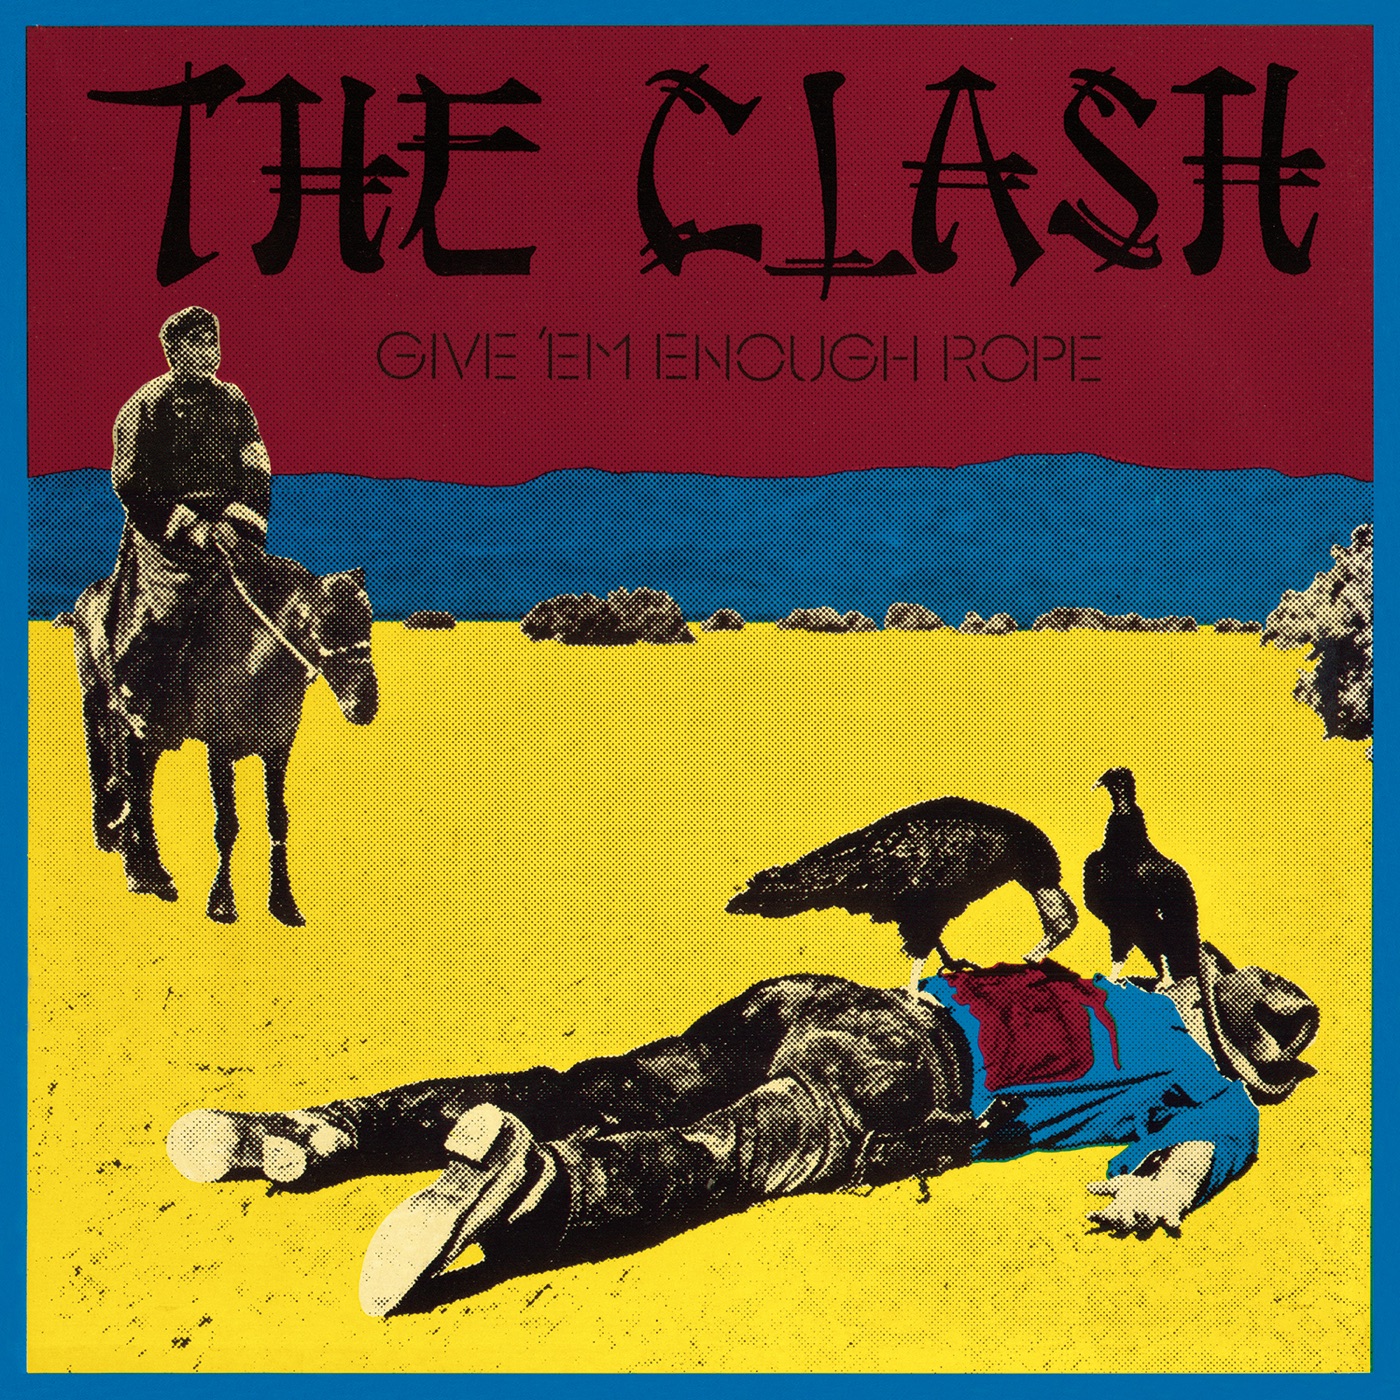 Safe European Home by The Clash